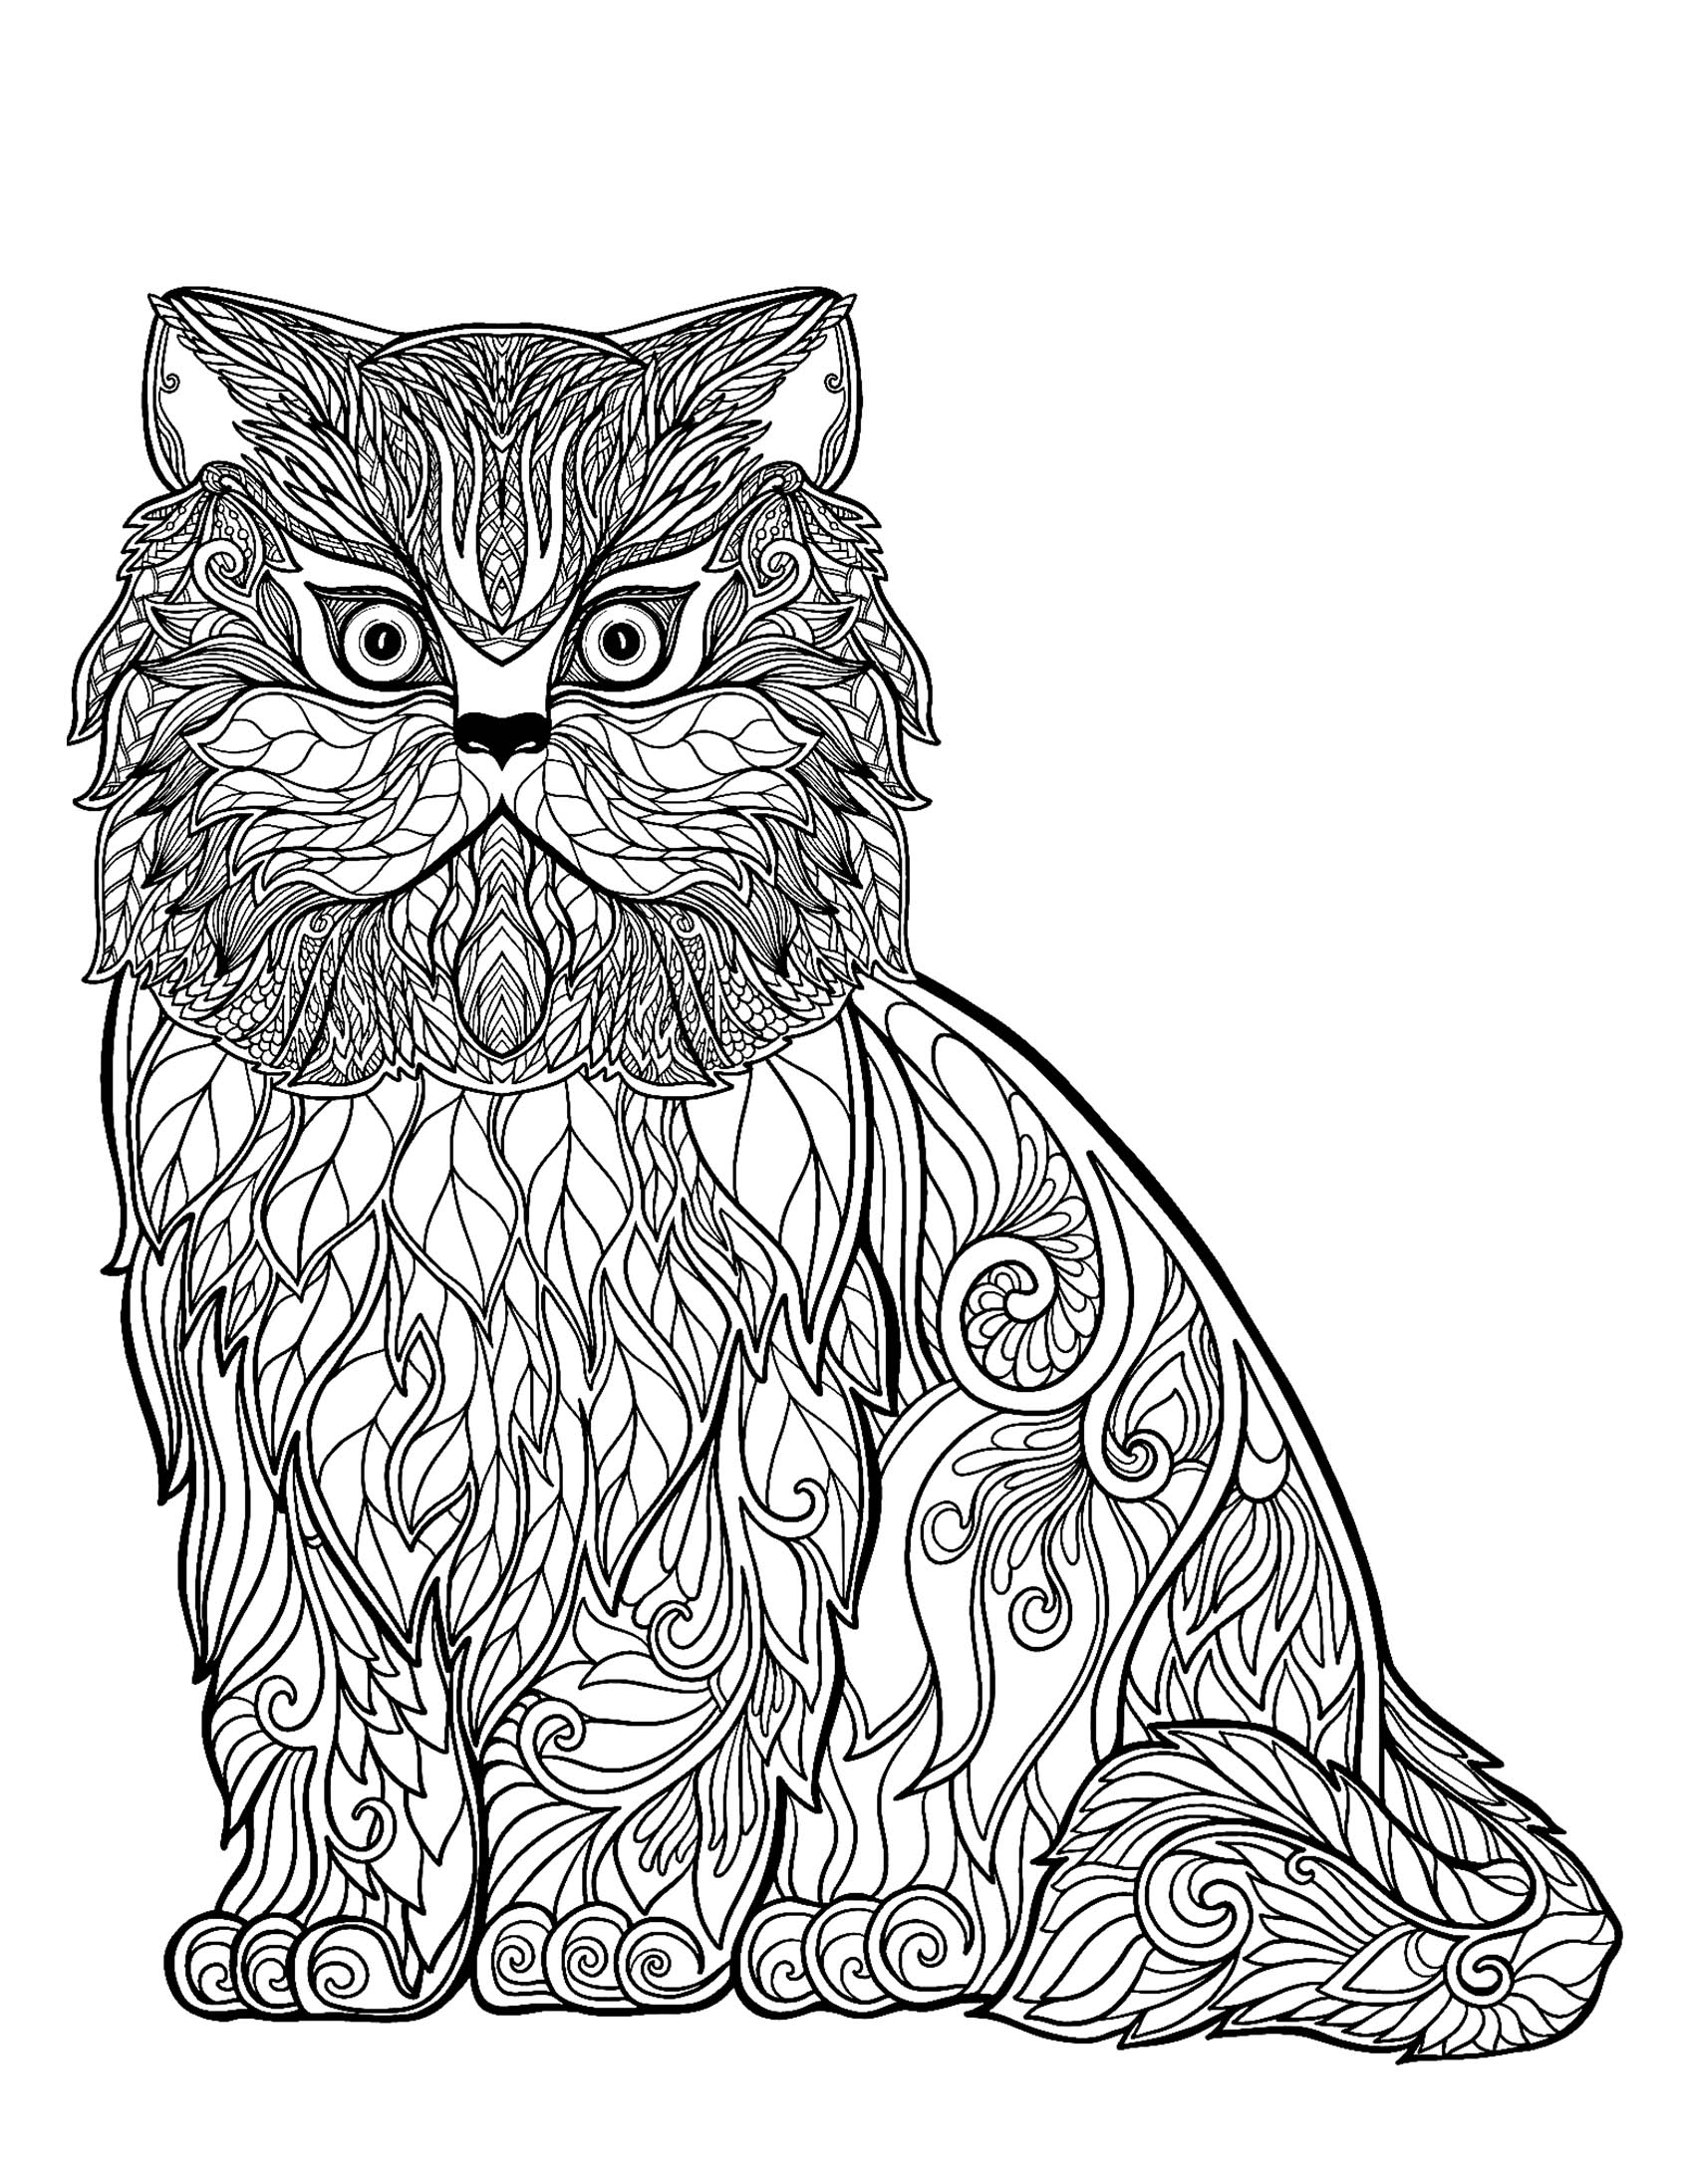 Cat free to color for kids : Wise cat full of details ...